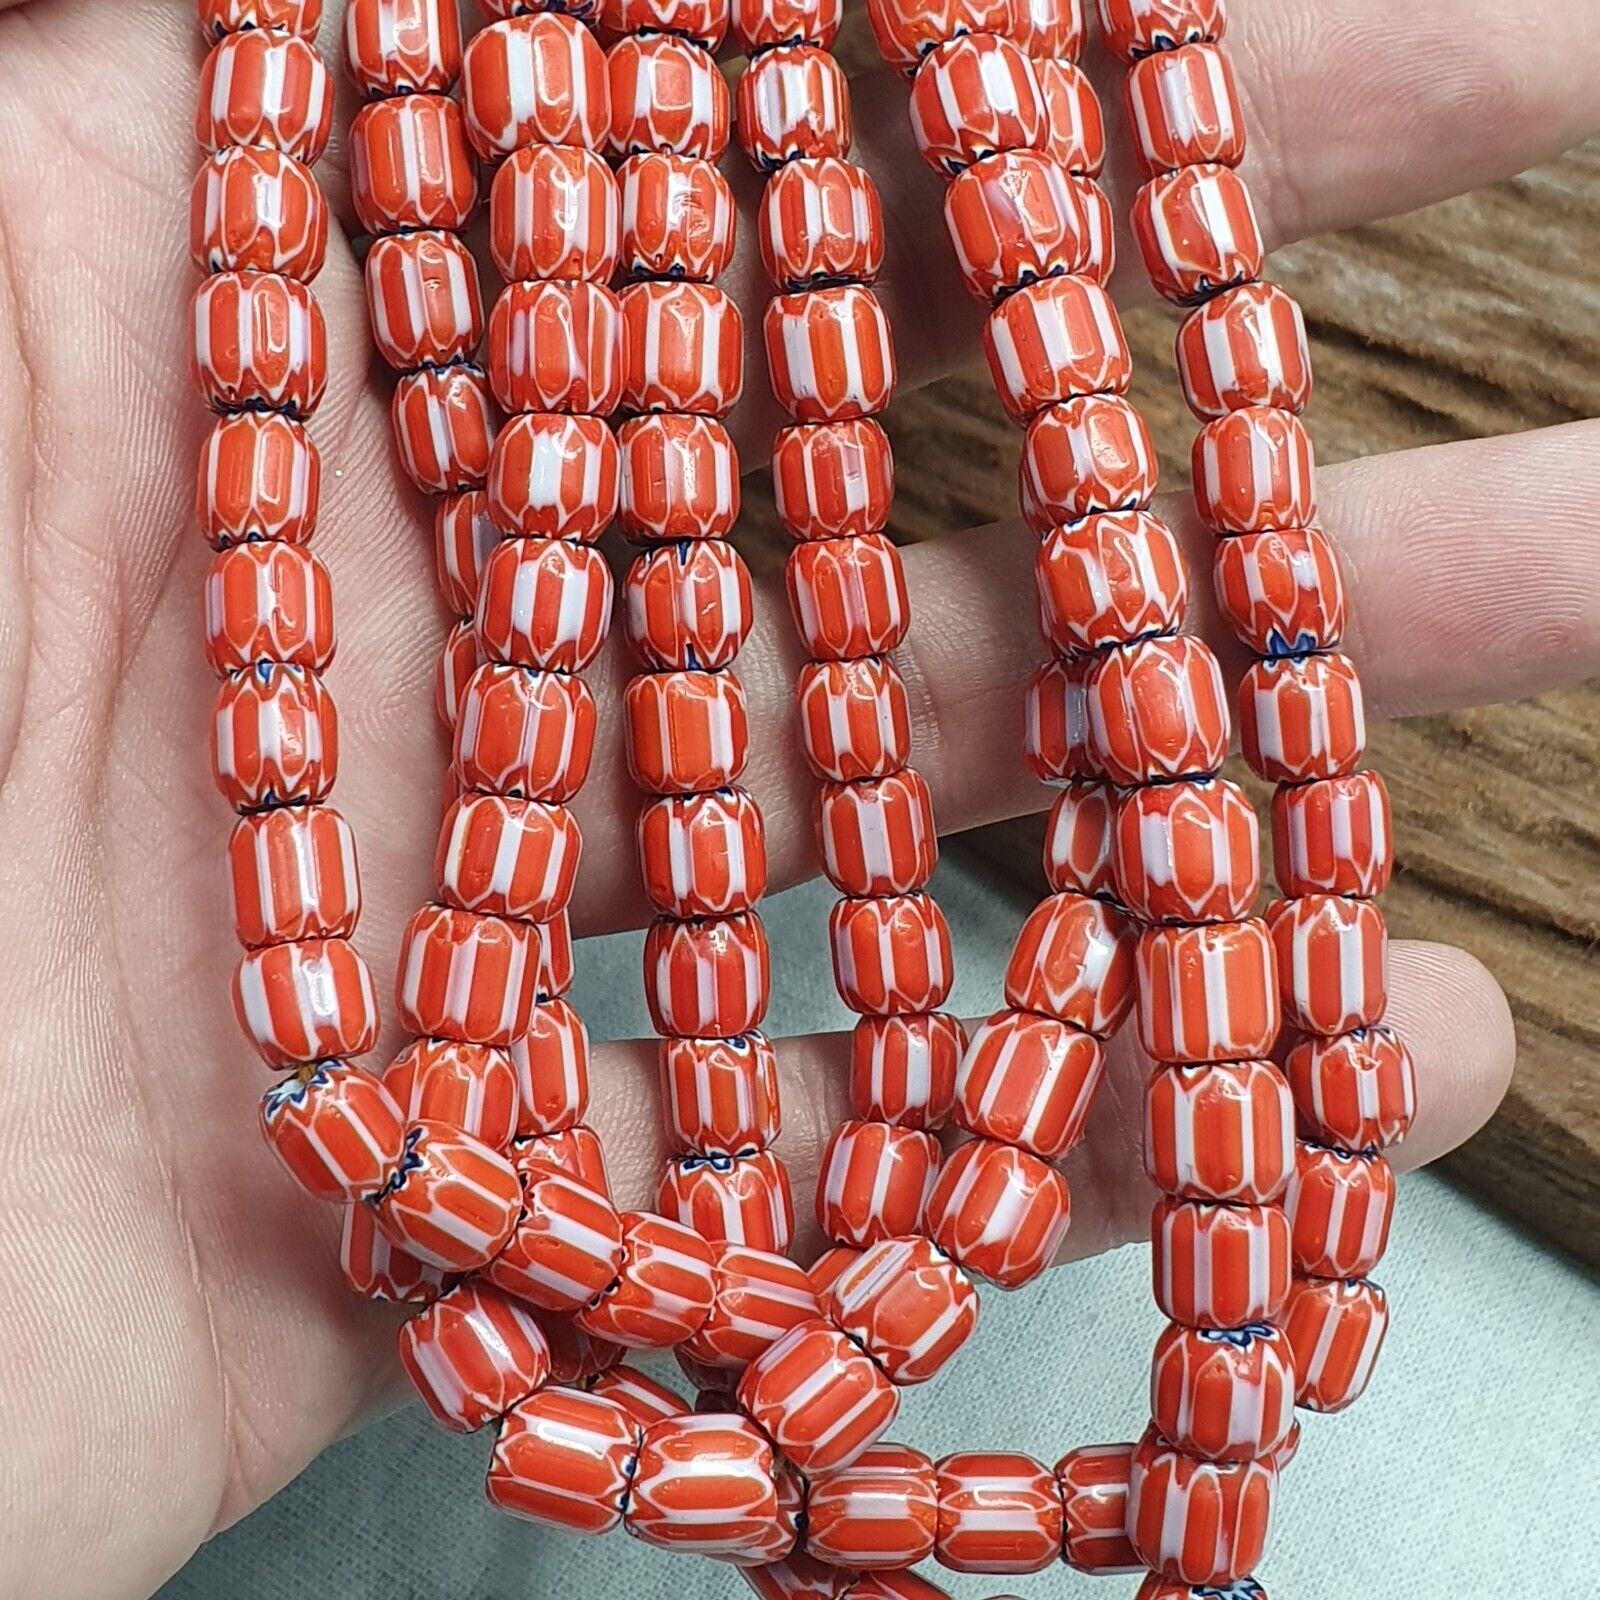 Vintage Venetian Style beads African Red Glass Chevron Beads Long Strand